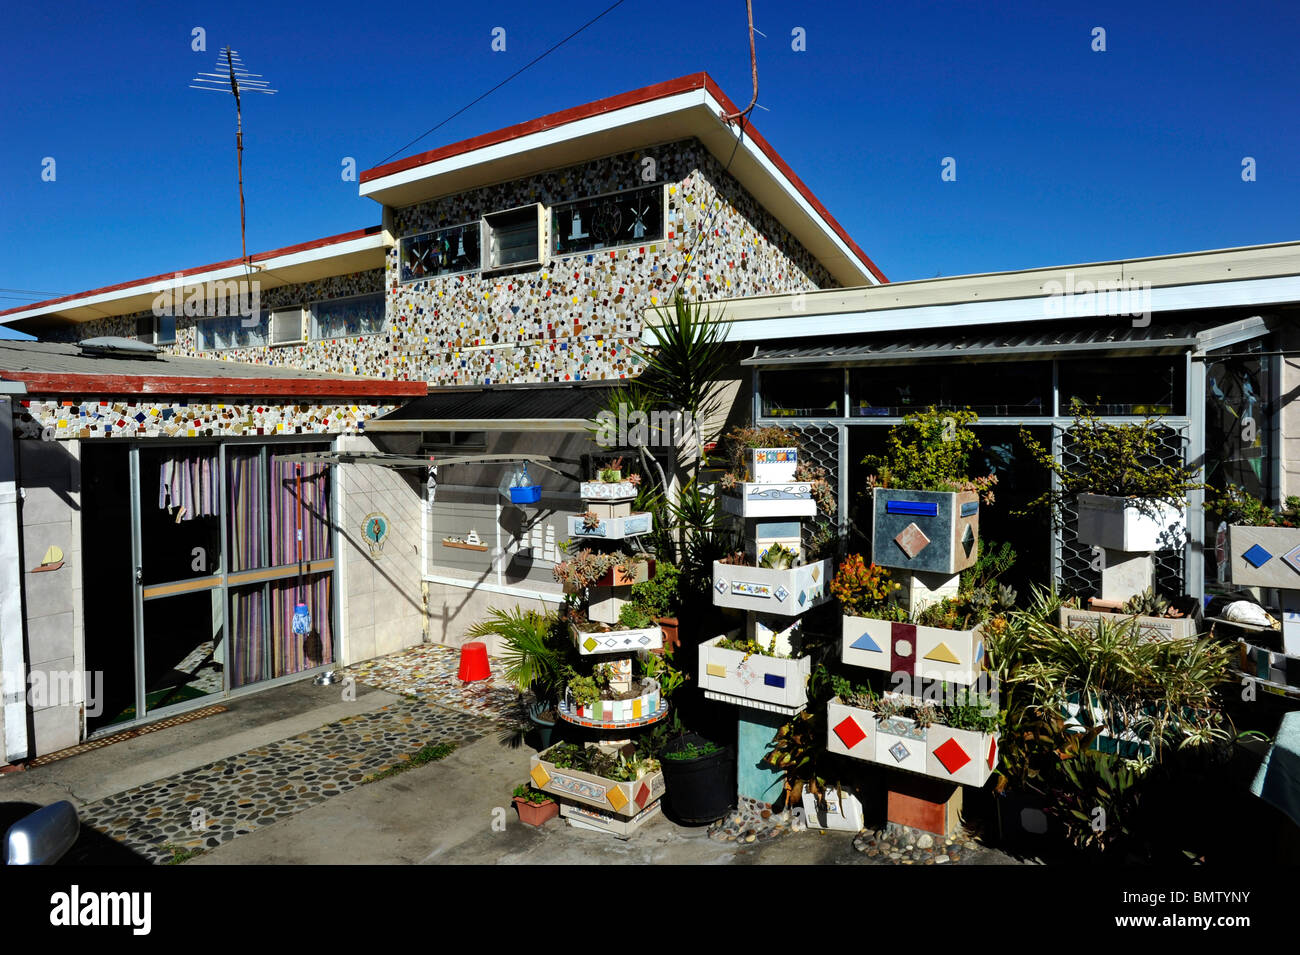 An eccentric home decorated with ceramic tiles at Ballina on the Northern NSW Coast Australia Stock Photo